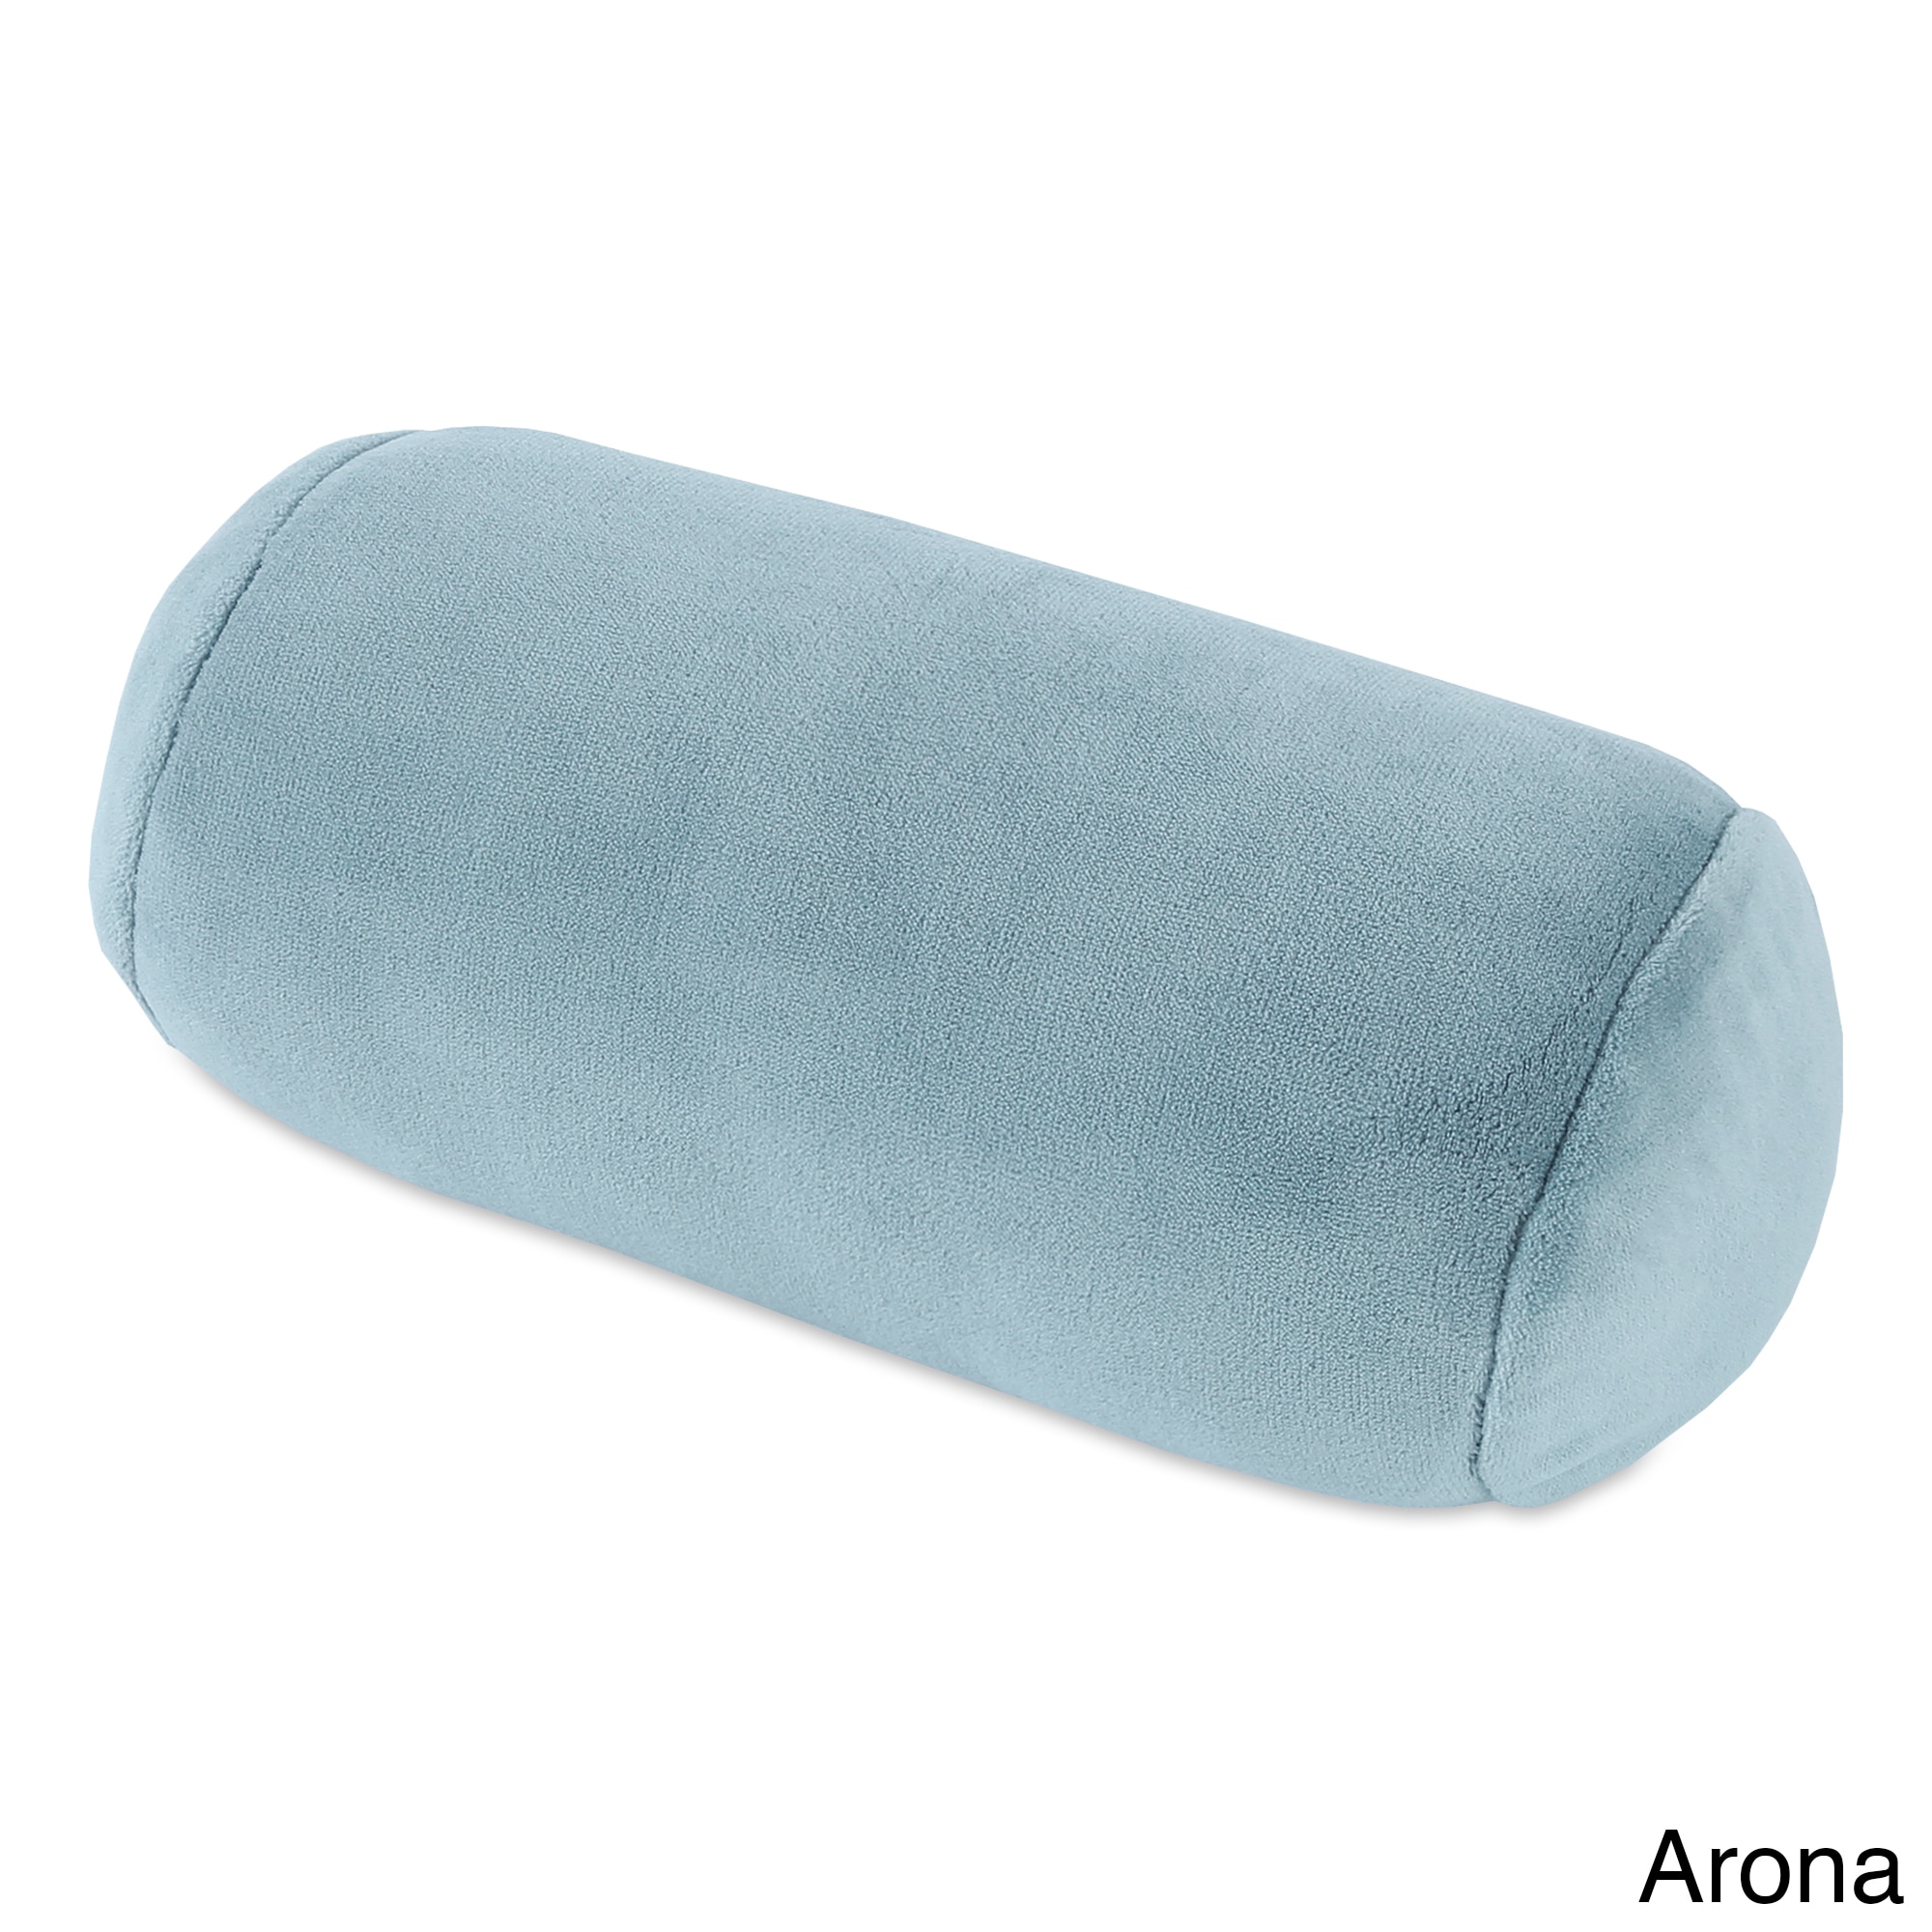 neck roll pillow for side sleepers